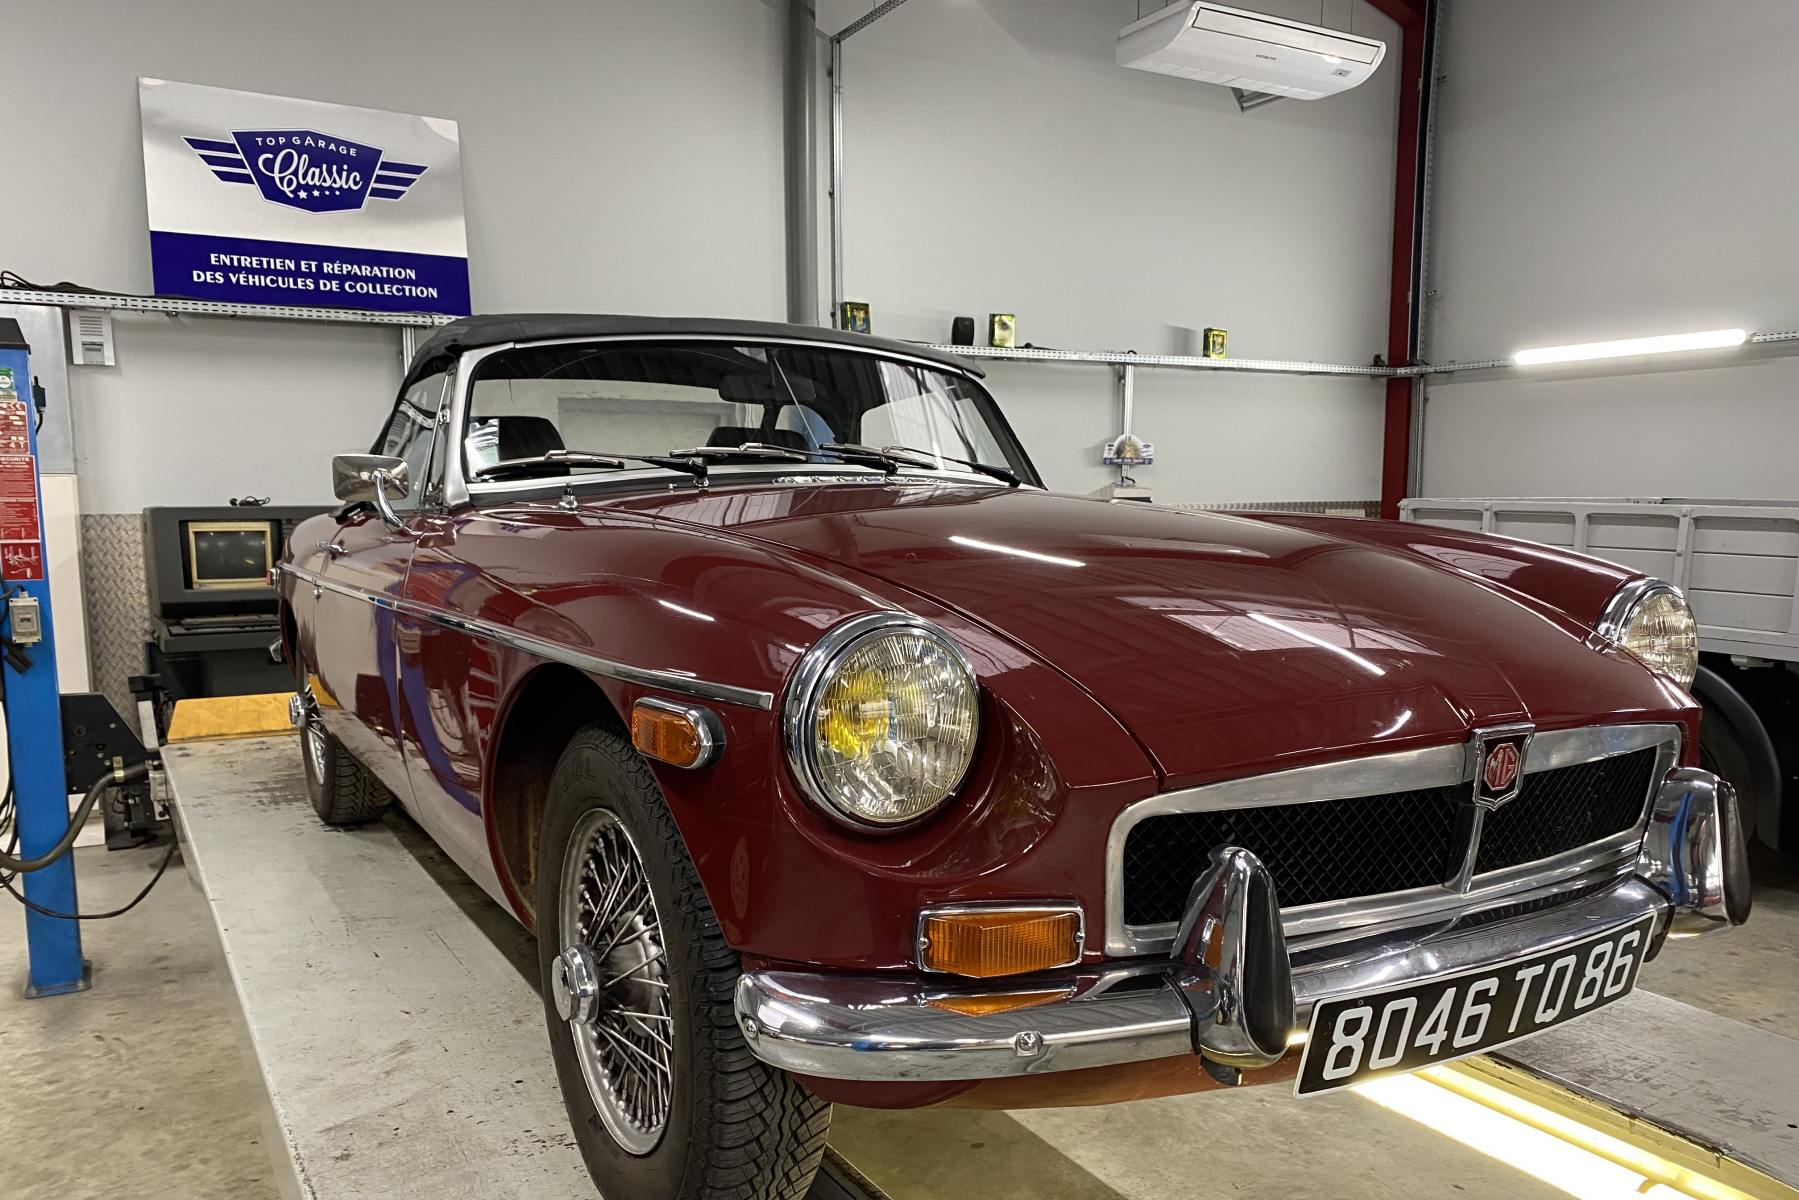 annonce - vente - MGB - MG - Classic Auto Restor - Angouleme - Charente - France